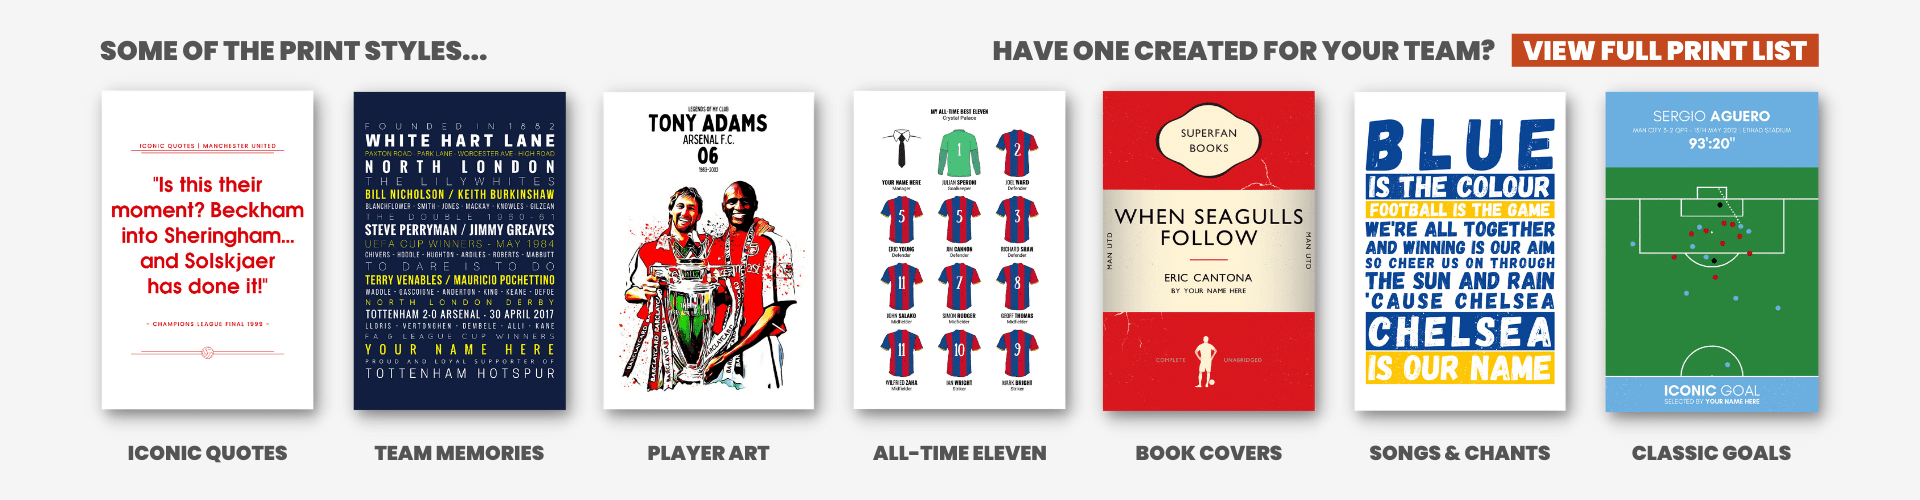 Various football print styles - quotes, memories, art, all-time XI, book covers, songs